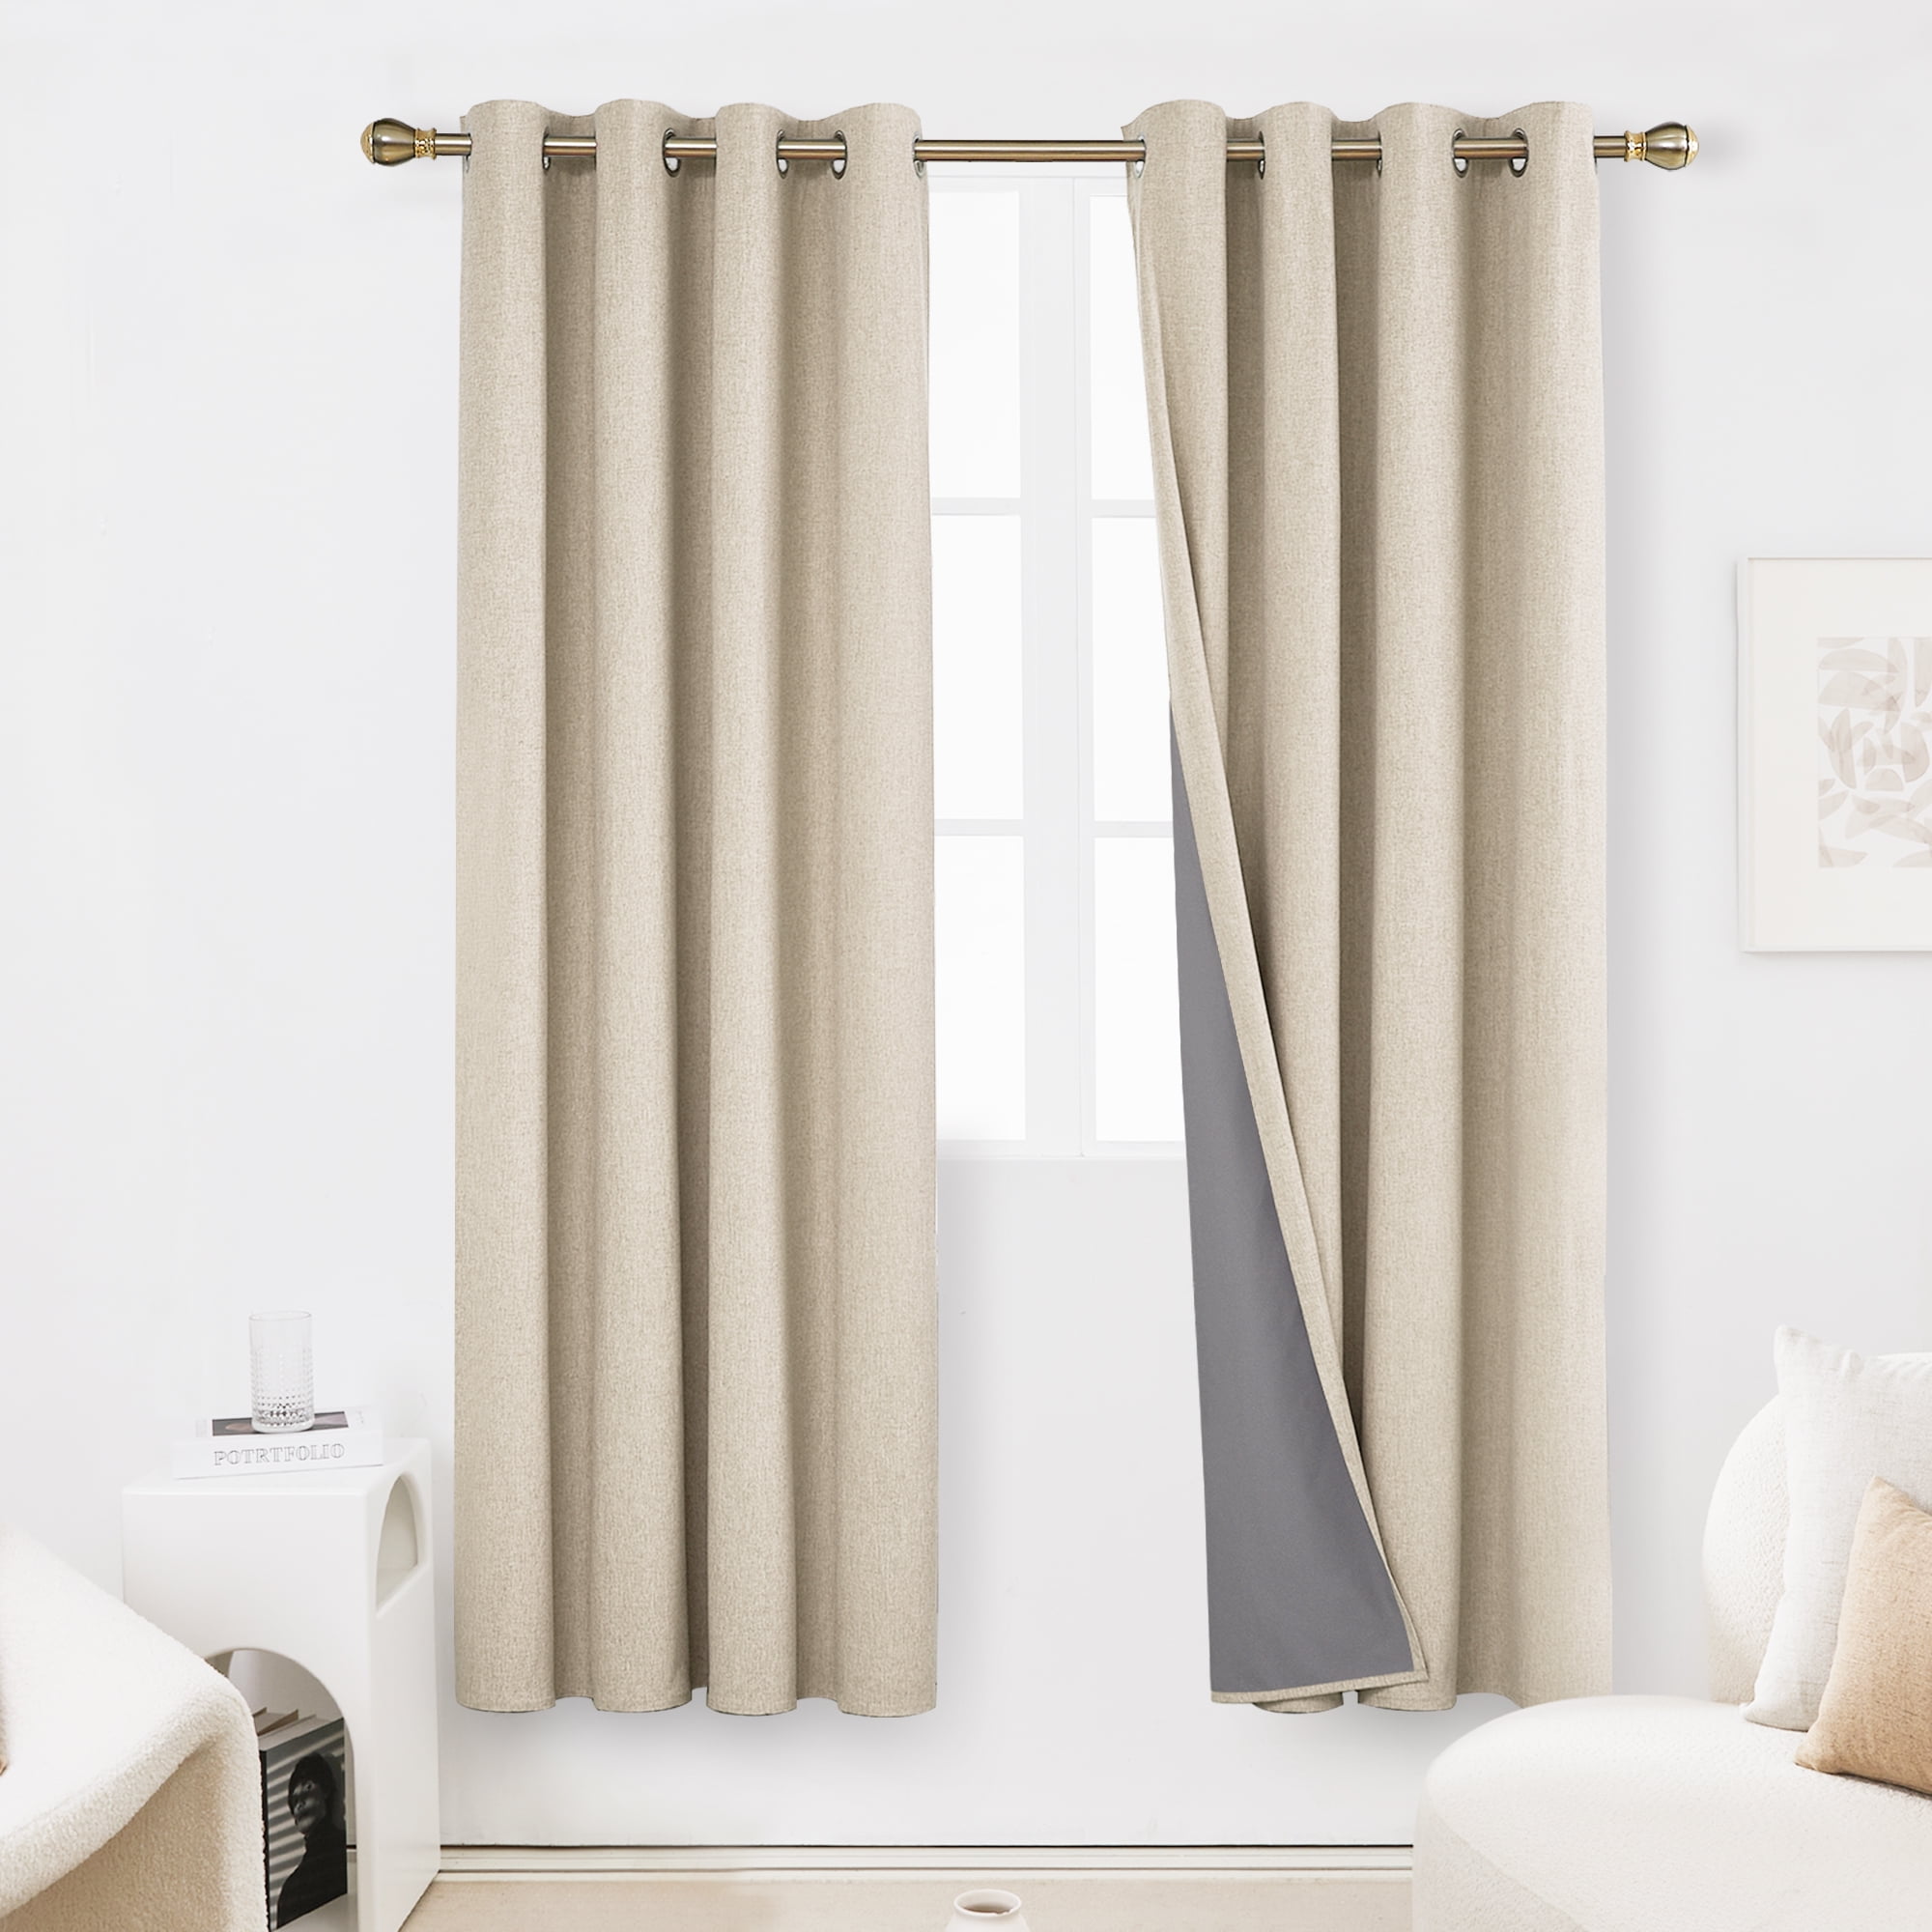 Grey Curtains Adventure with Motorcycle Window Drapes 2 Panel Set 108x84 Inches 